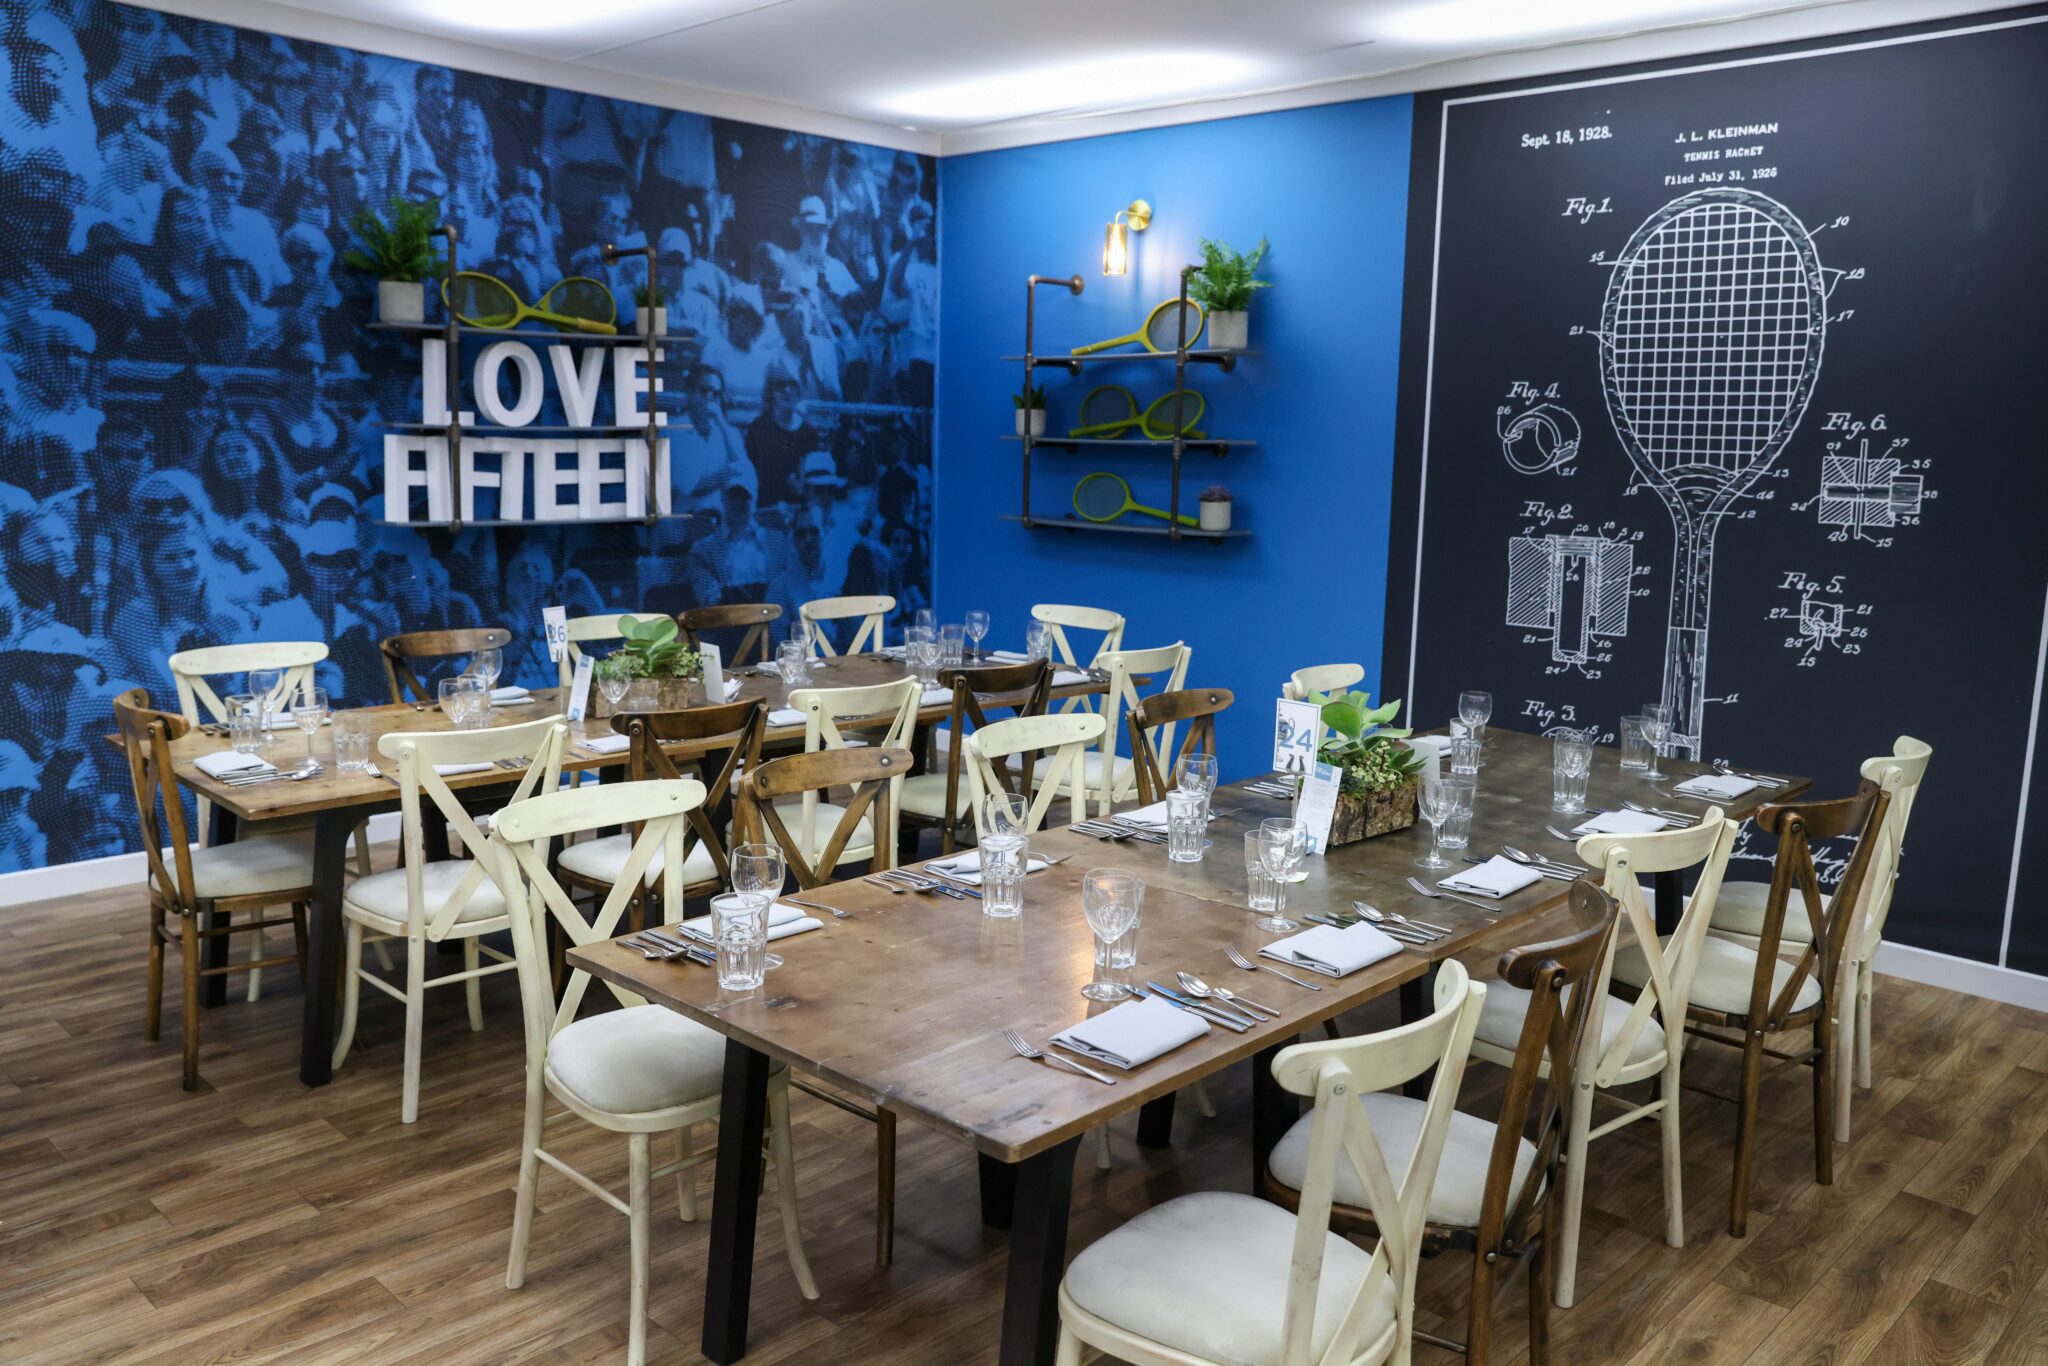 Image of the blue Love Fifteen restaurant with tables and chairs layed out